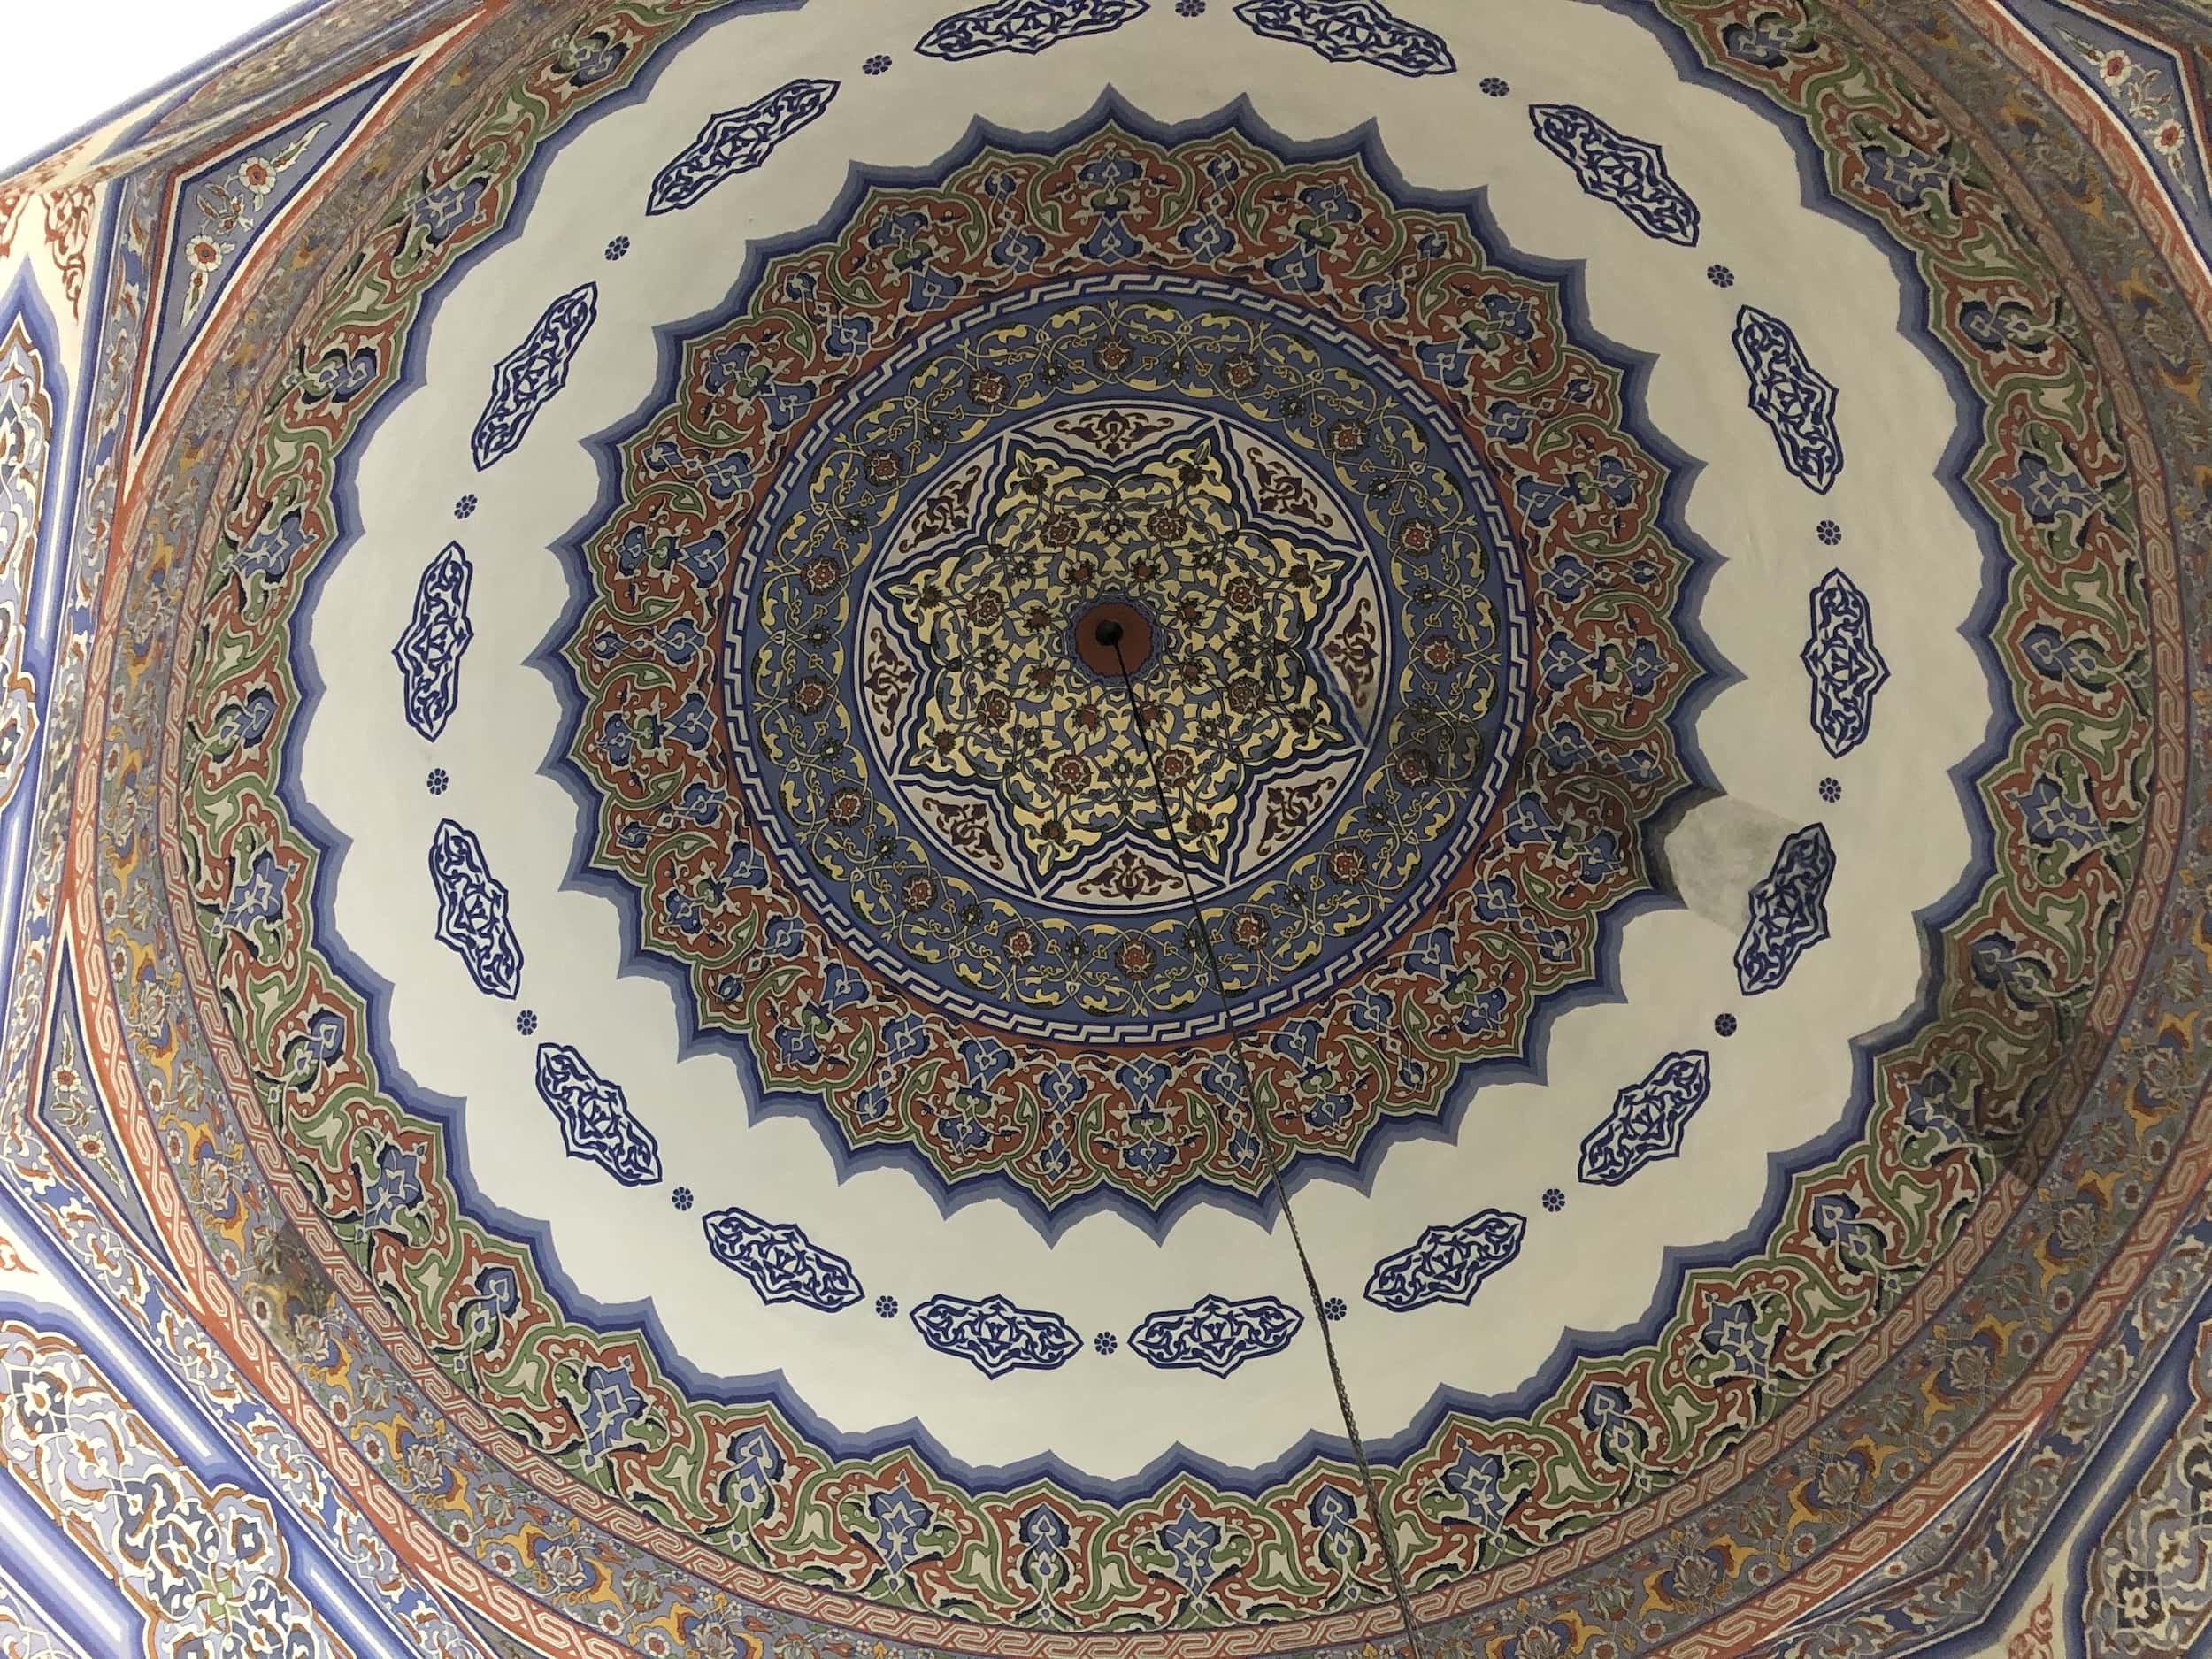 Dome at the Ethnography Museum in Ankara, Turkey